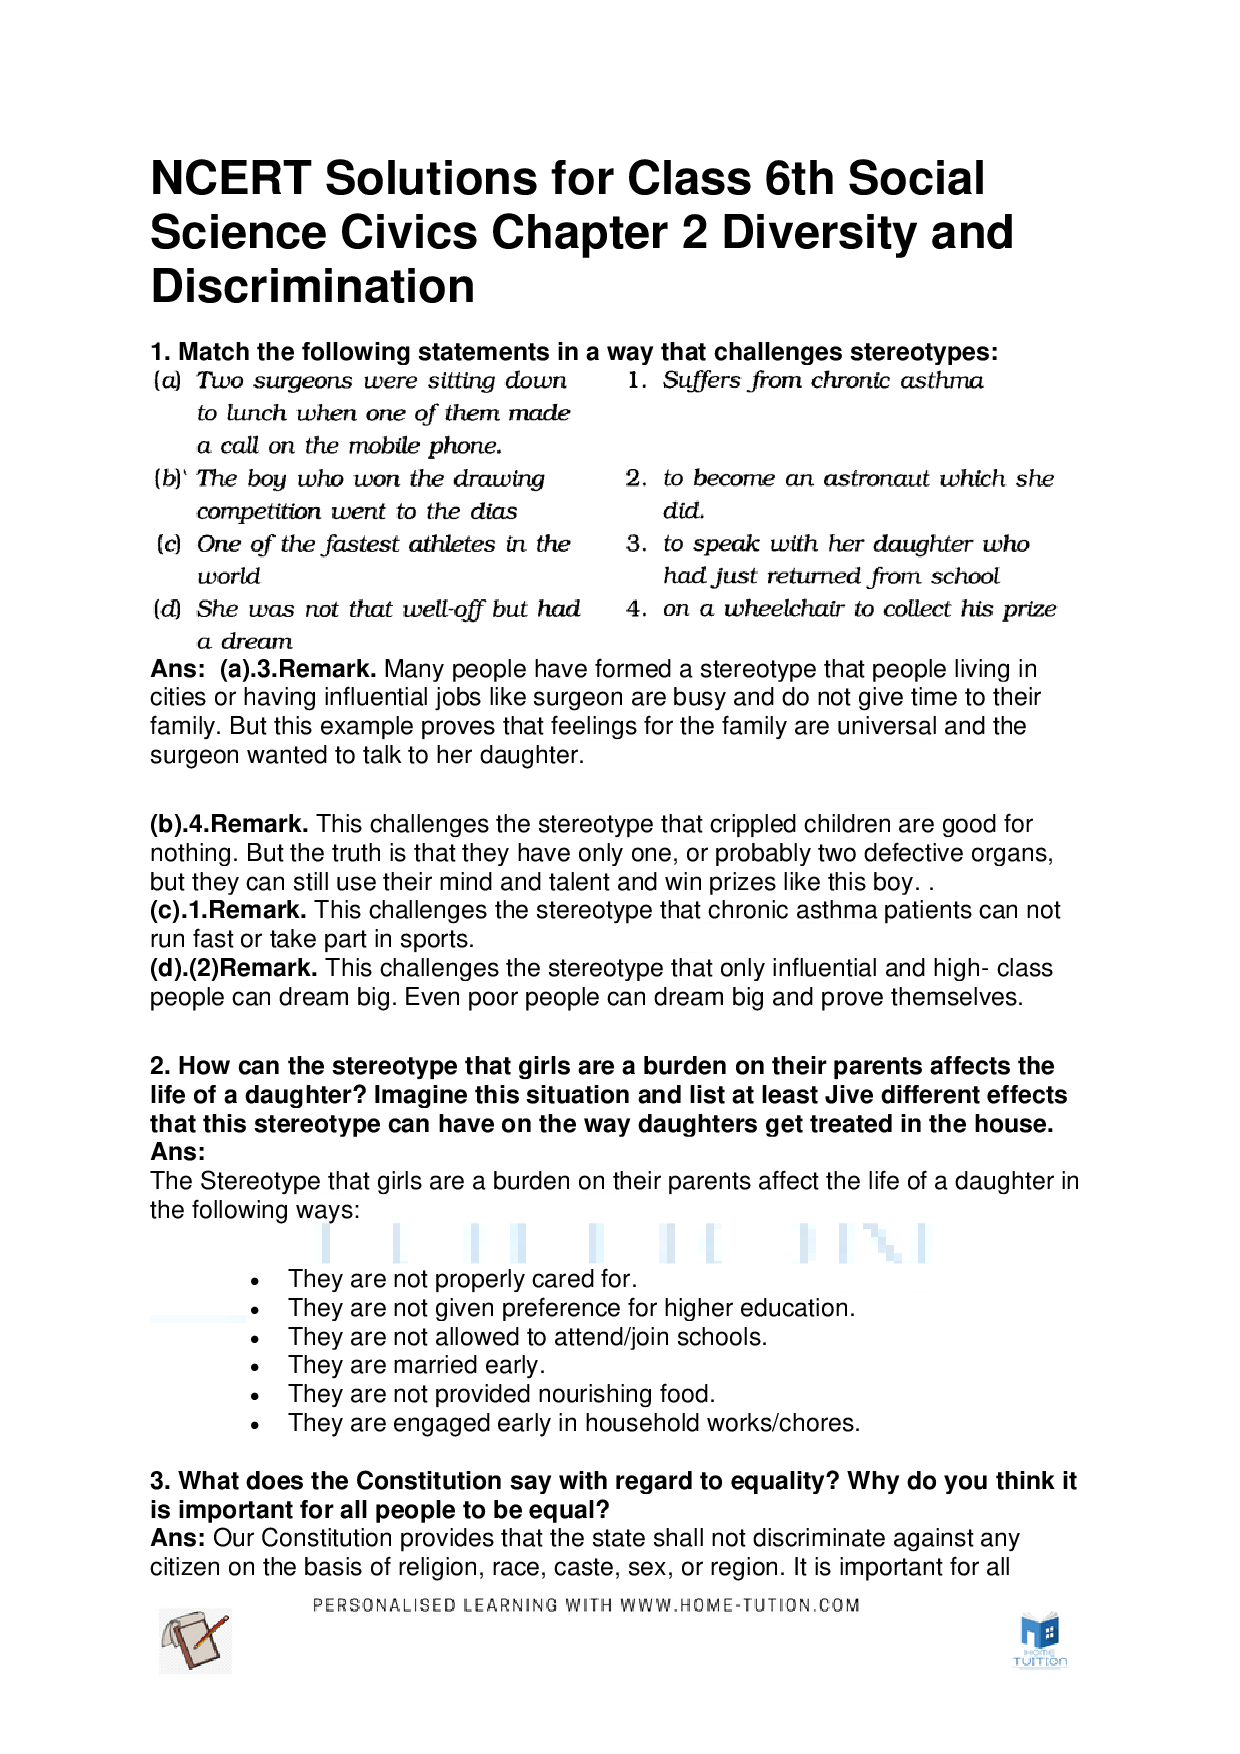 Chapter 2 Diversity and Discrimination